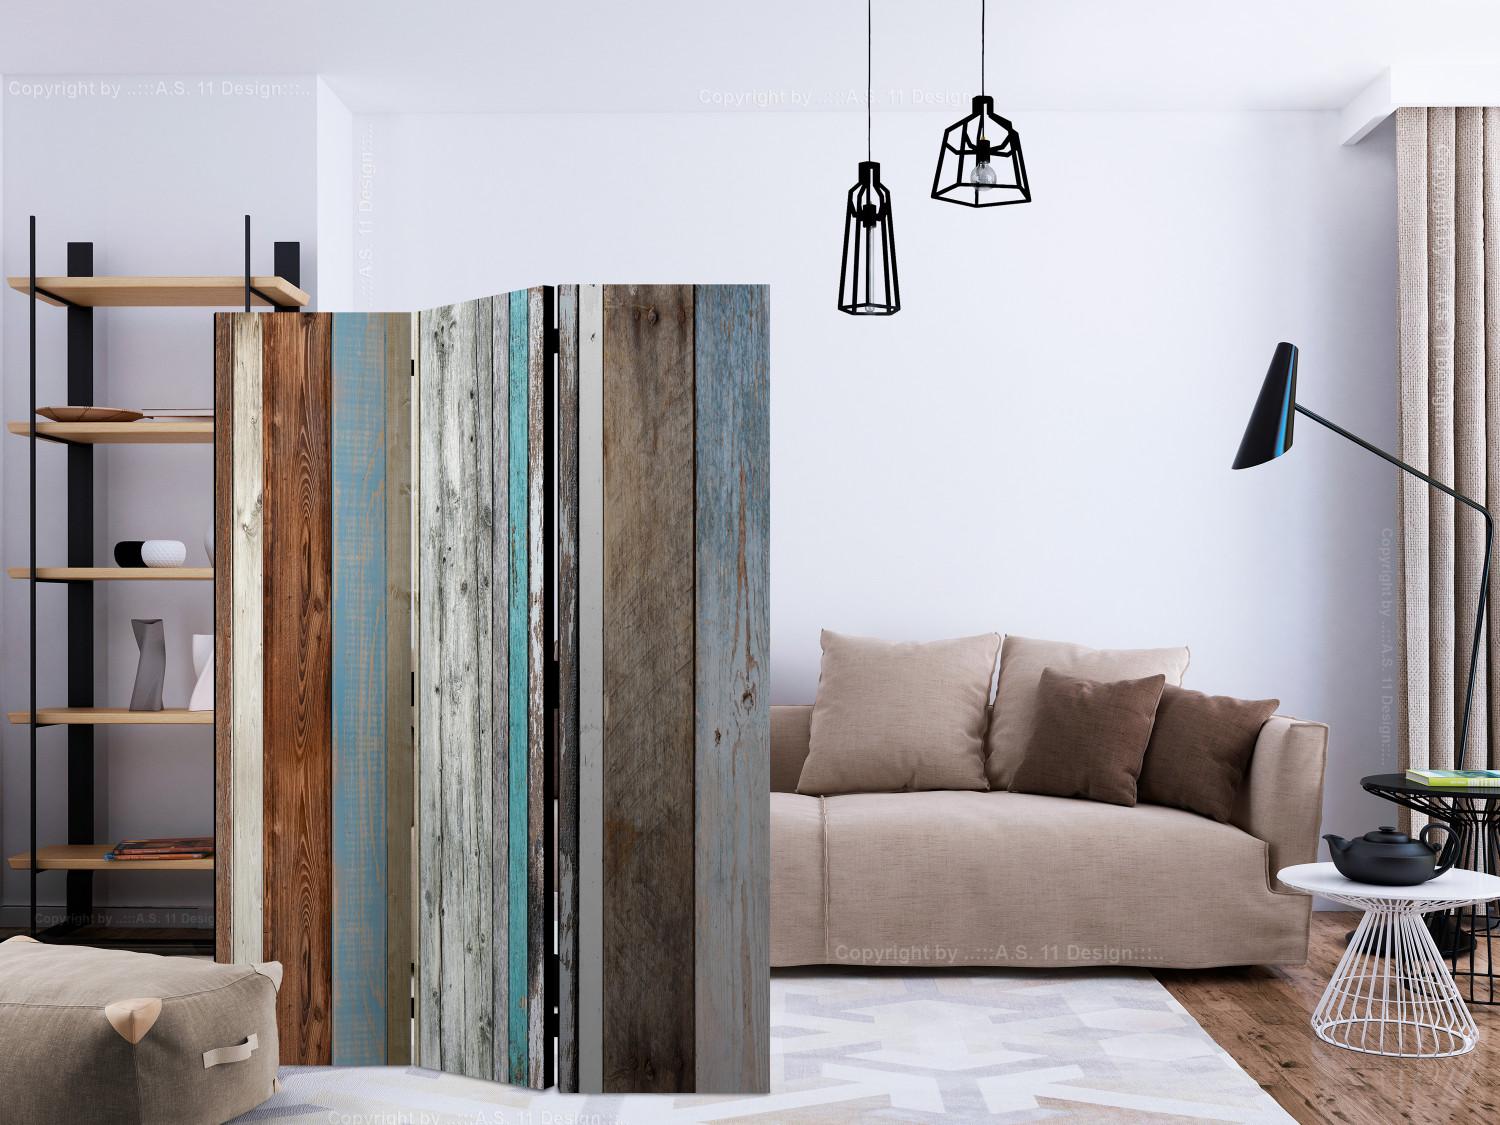 Room Divider Arranged Colors (3-piece) - composition in colorful wooden planks